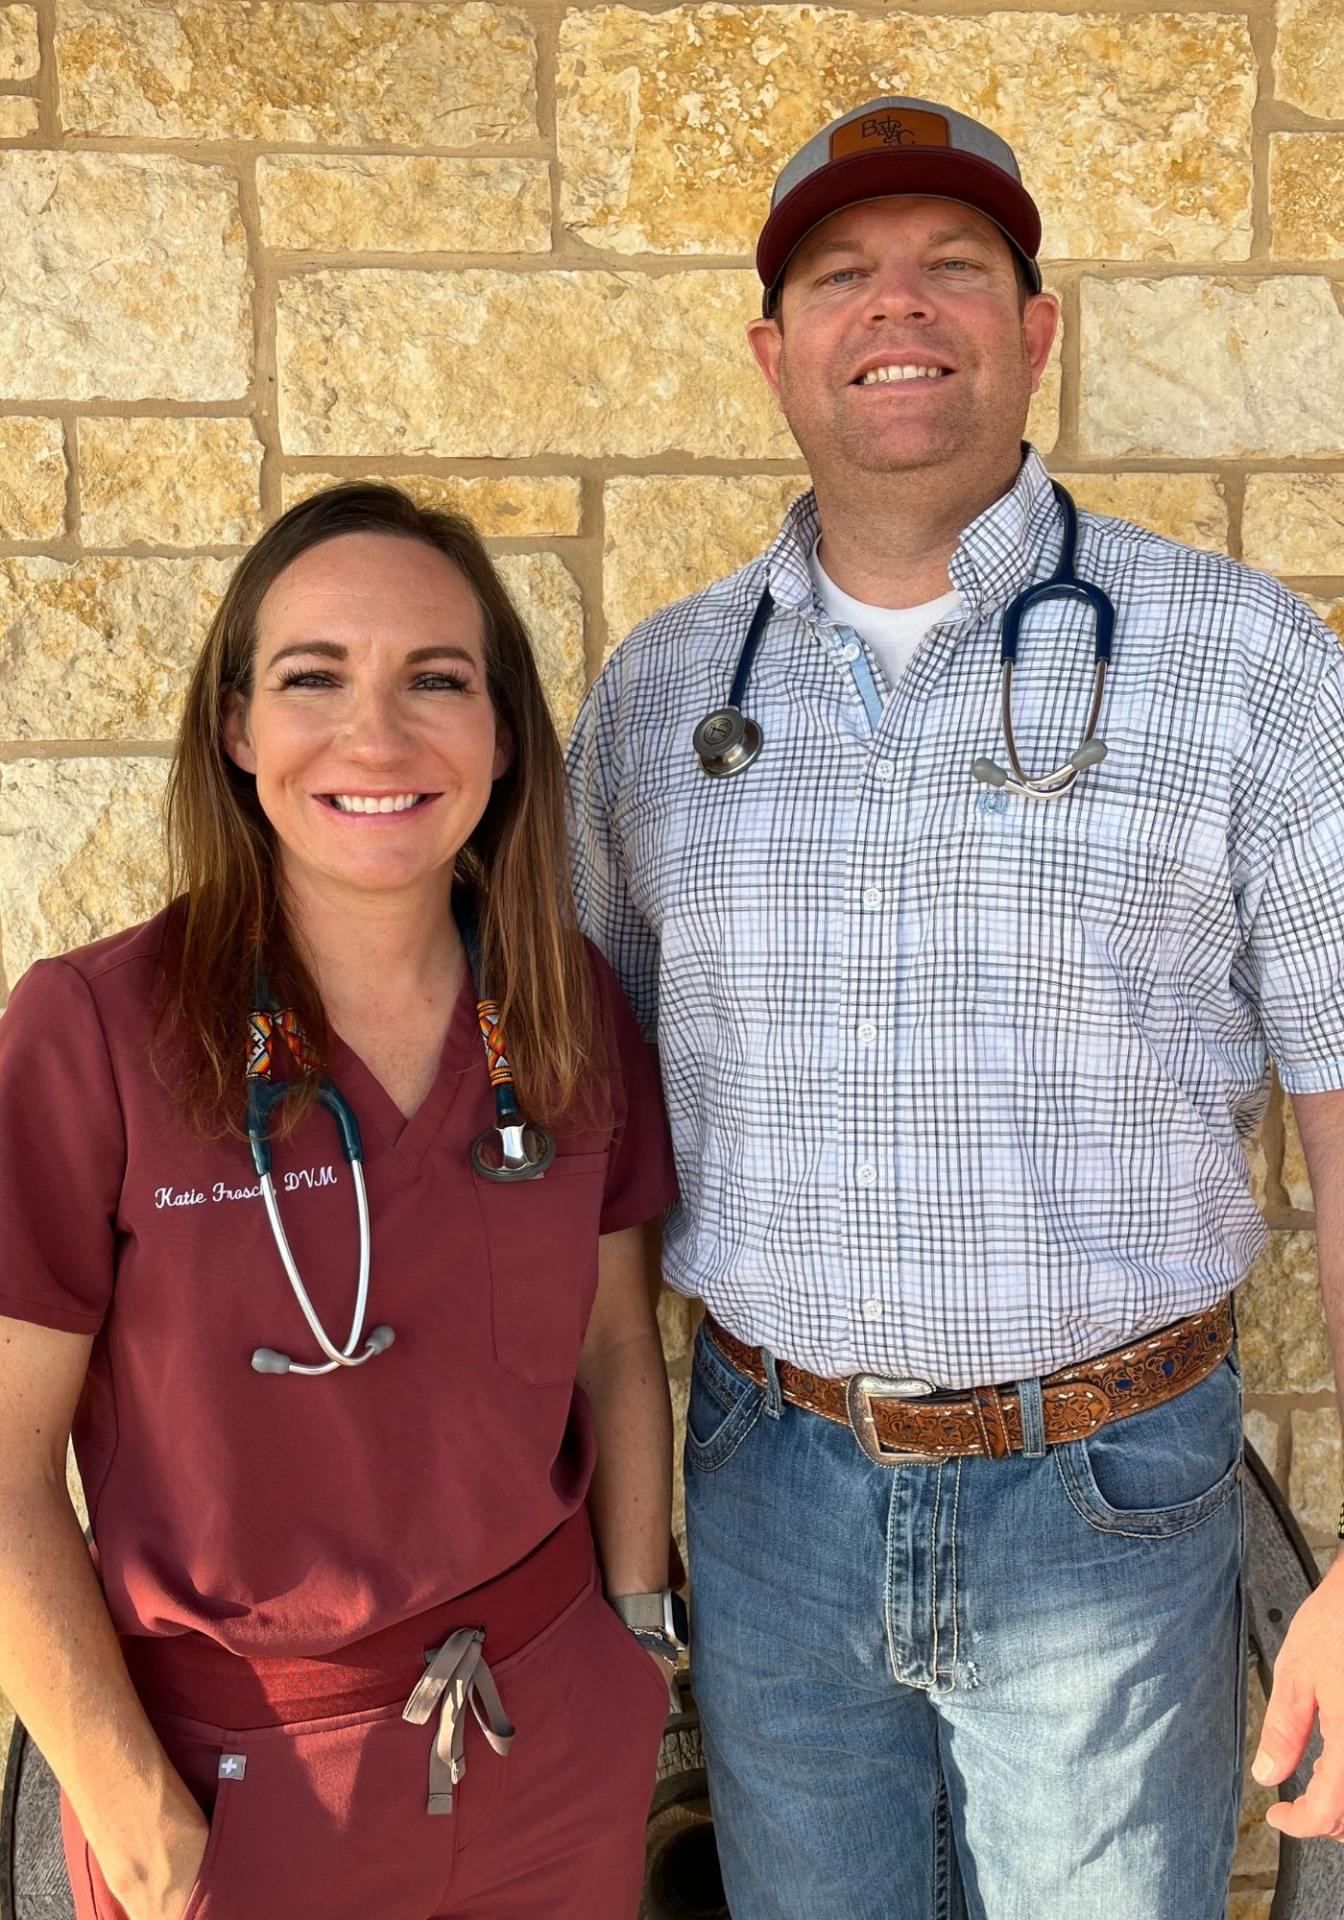 Dr. Frosch and Dr. Fish, owners of Belton Veterinary Clinic